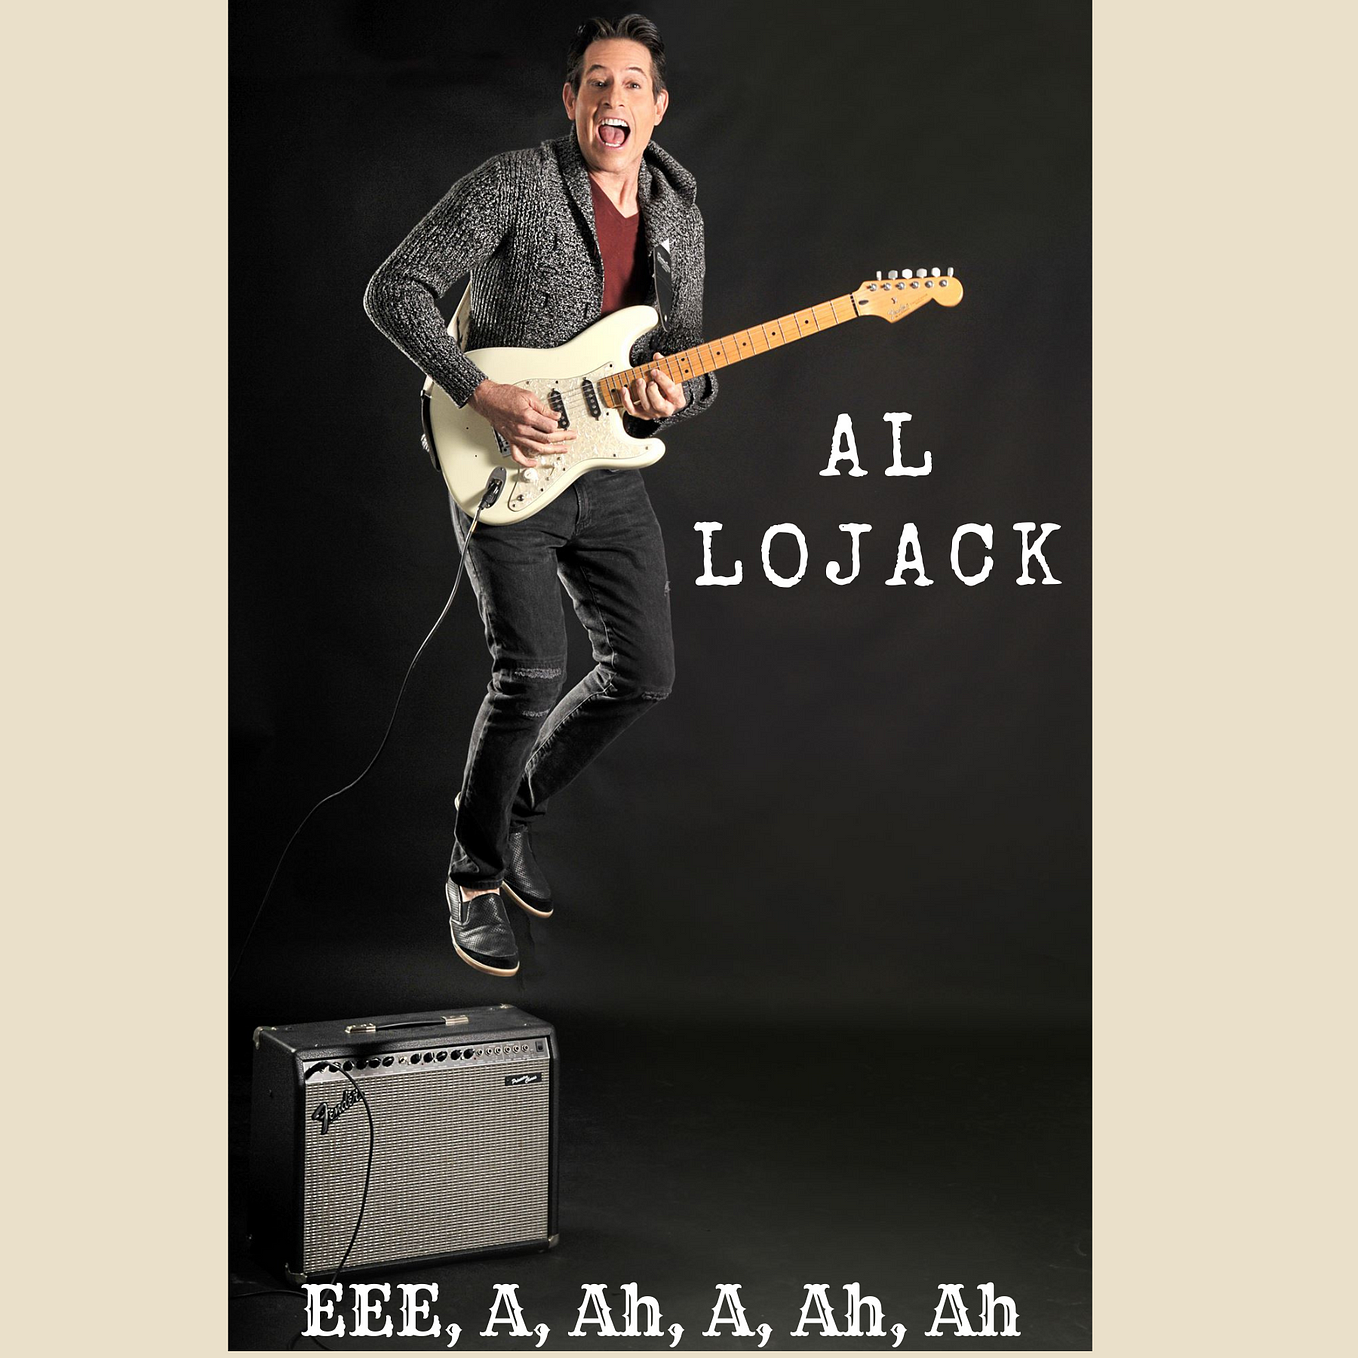 South Beach Musician Al Lojack Releases Quirky New Single “EEE Ah.. ”